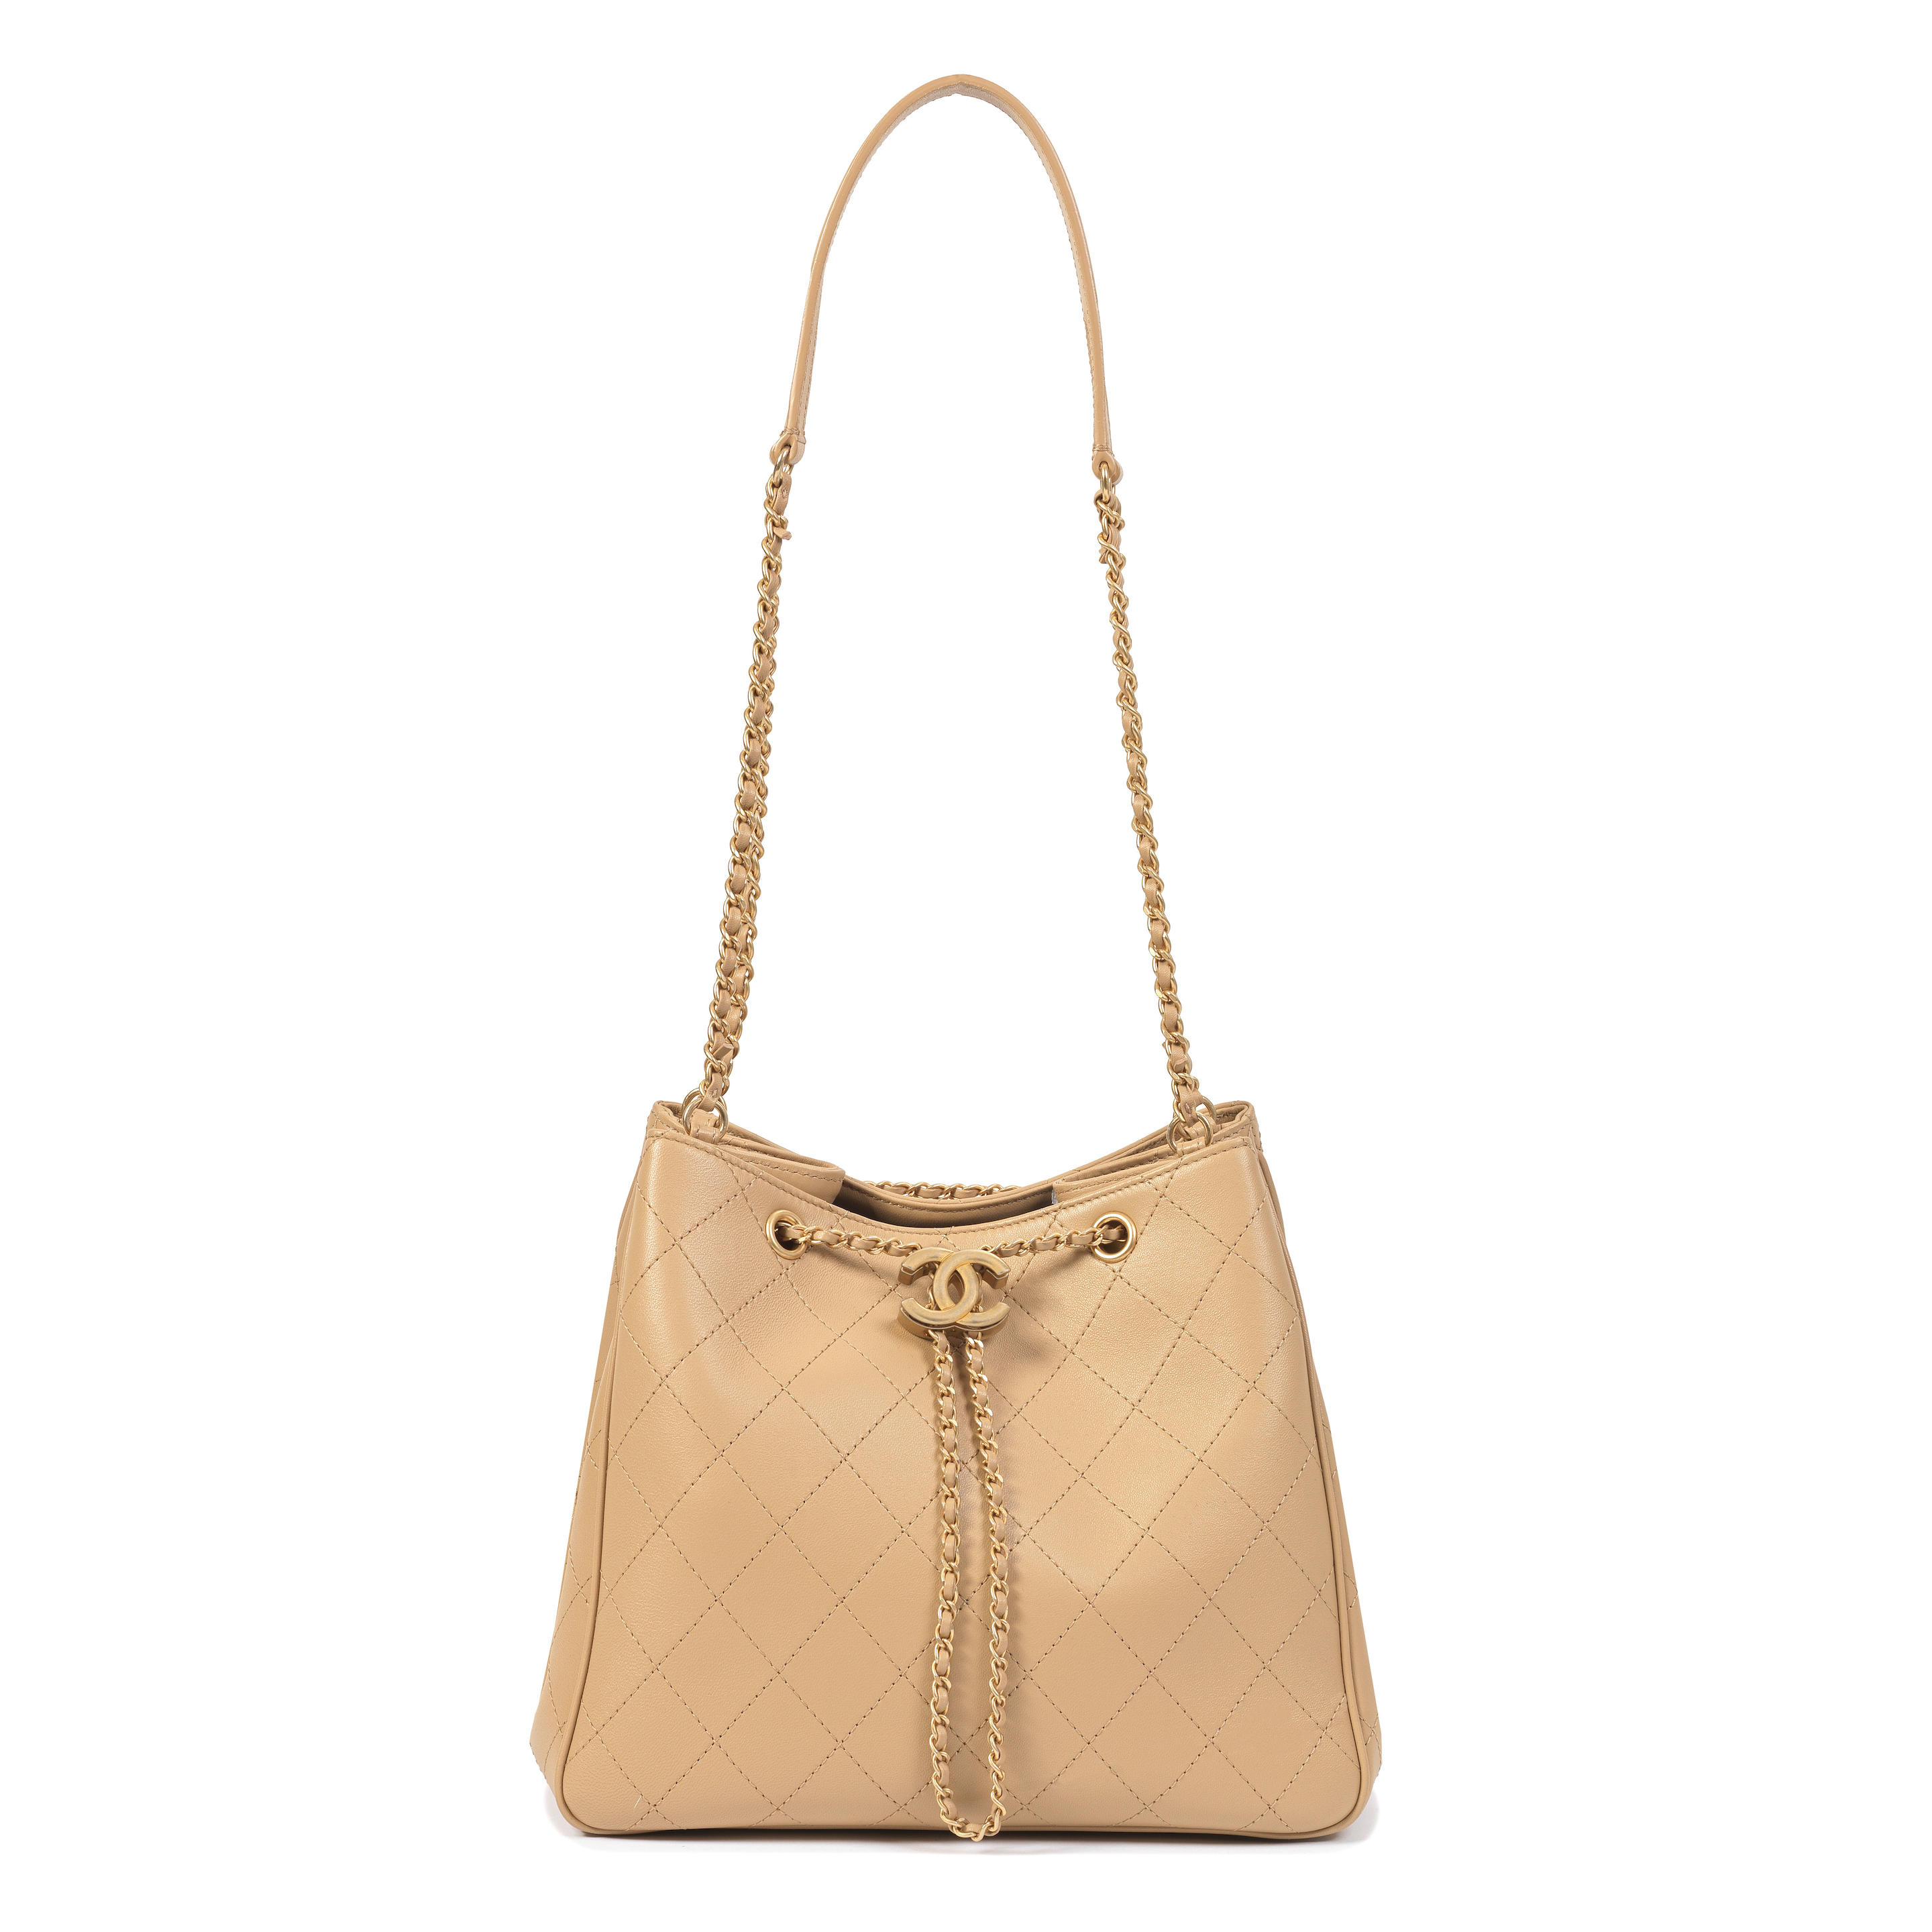 Chanel Beige Quilted Leather Egyptian Amulet Drawstring Bucket Bag Chanel